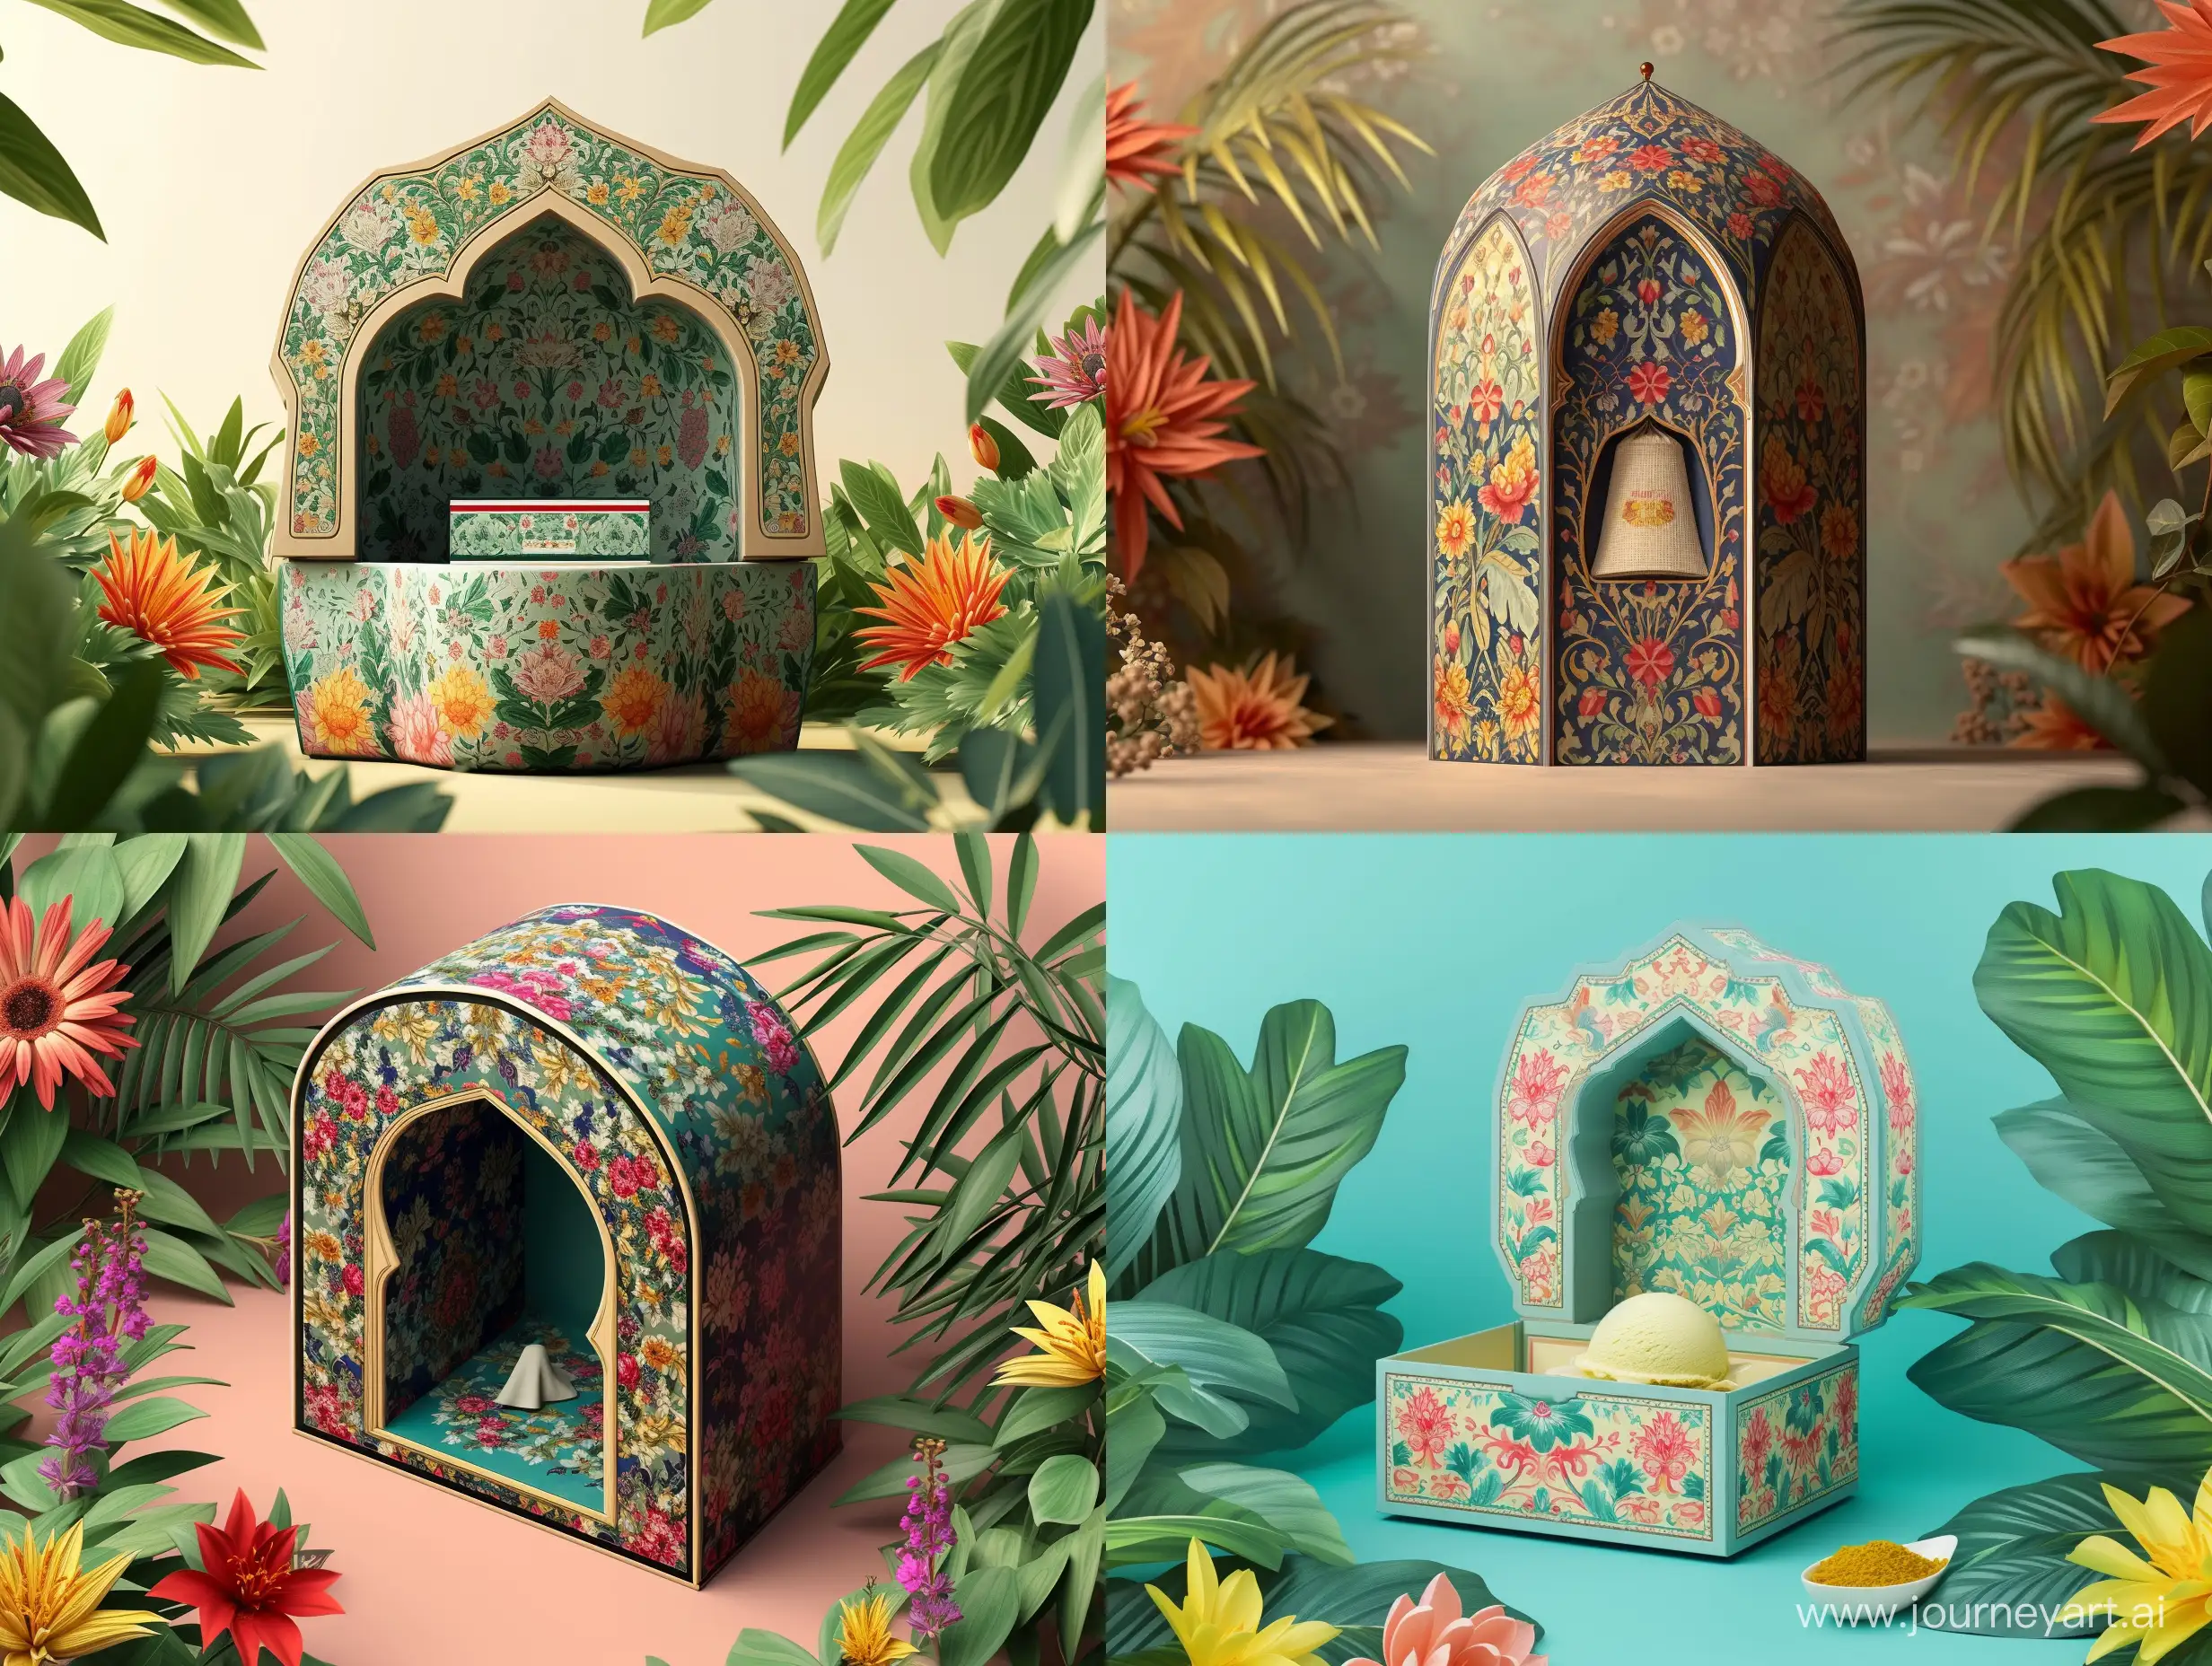 create me an image of a minimal design style and sustainable material packaging design that embodies the charm and meaning of the Iwan, a stunning vaulted archway in Persian architecture. Craft a miniature iwan-shaped container with persian patterns and Minimal colors inspired by miniature paintings Emphasize the traiditionality of the Iwan with a sleek design.
Depict the iwan amid lush flora and vibrant flowers to symbolize the transition from ordinary life to a paradisiacal realm, drawing inspiration from Persian miniature paintings for an artistic touch.
Make sustainability a focal point by using recycled paperboard with biodegradable lacquer for an environmentally conscious yet visually appealing package. Ensure that the materials used are recyclable, promoting a circular economy.
Incorporate interactive elements like a concealed compartment with a small fabric piece or scented sachet, providing a sensory experience that encapsulates the fragrance and ambiance associated with an Iwan.
Infuse the packaging with elements of minimalist design, sustainable materials, and interactive features, paying homage to the rich heritage and symbolism of Persian culture. By doing so, elevate traditional Persian saffron ice cream to a global sensation, highlighting the enduring beauty and cultural significance of Persian architecture. realistic style